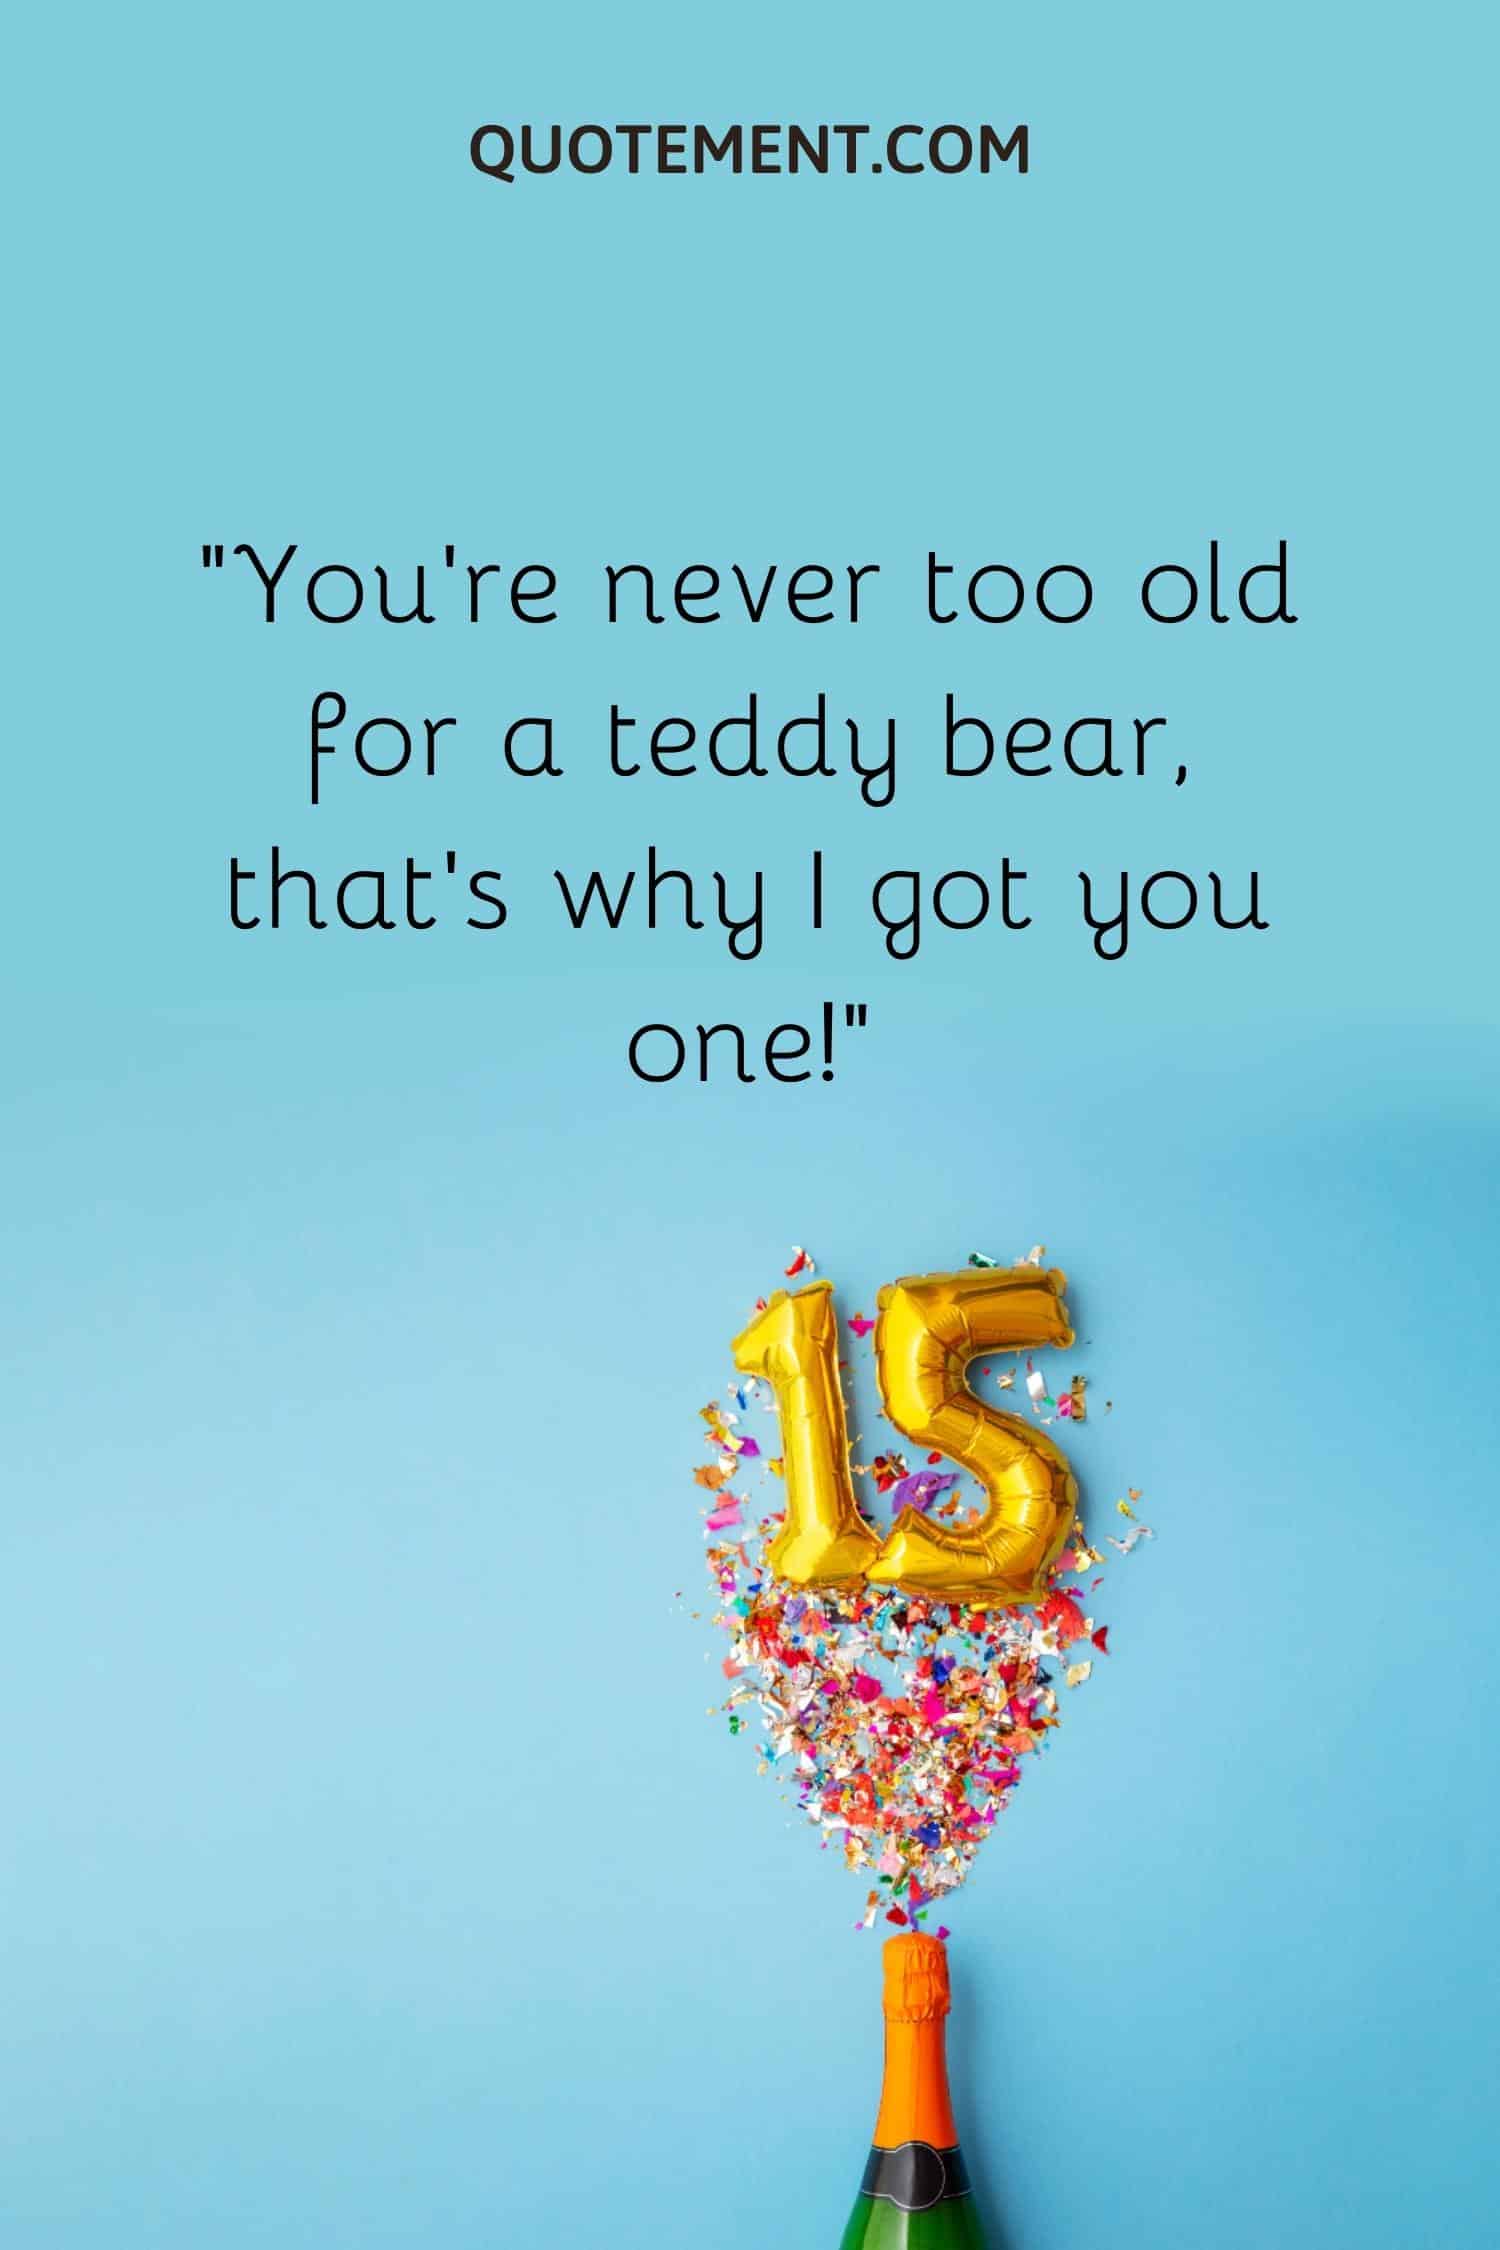 You’re never too old for a teddy bear